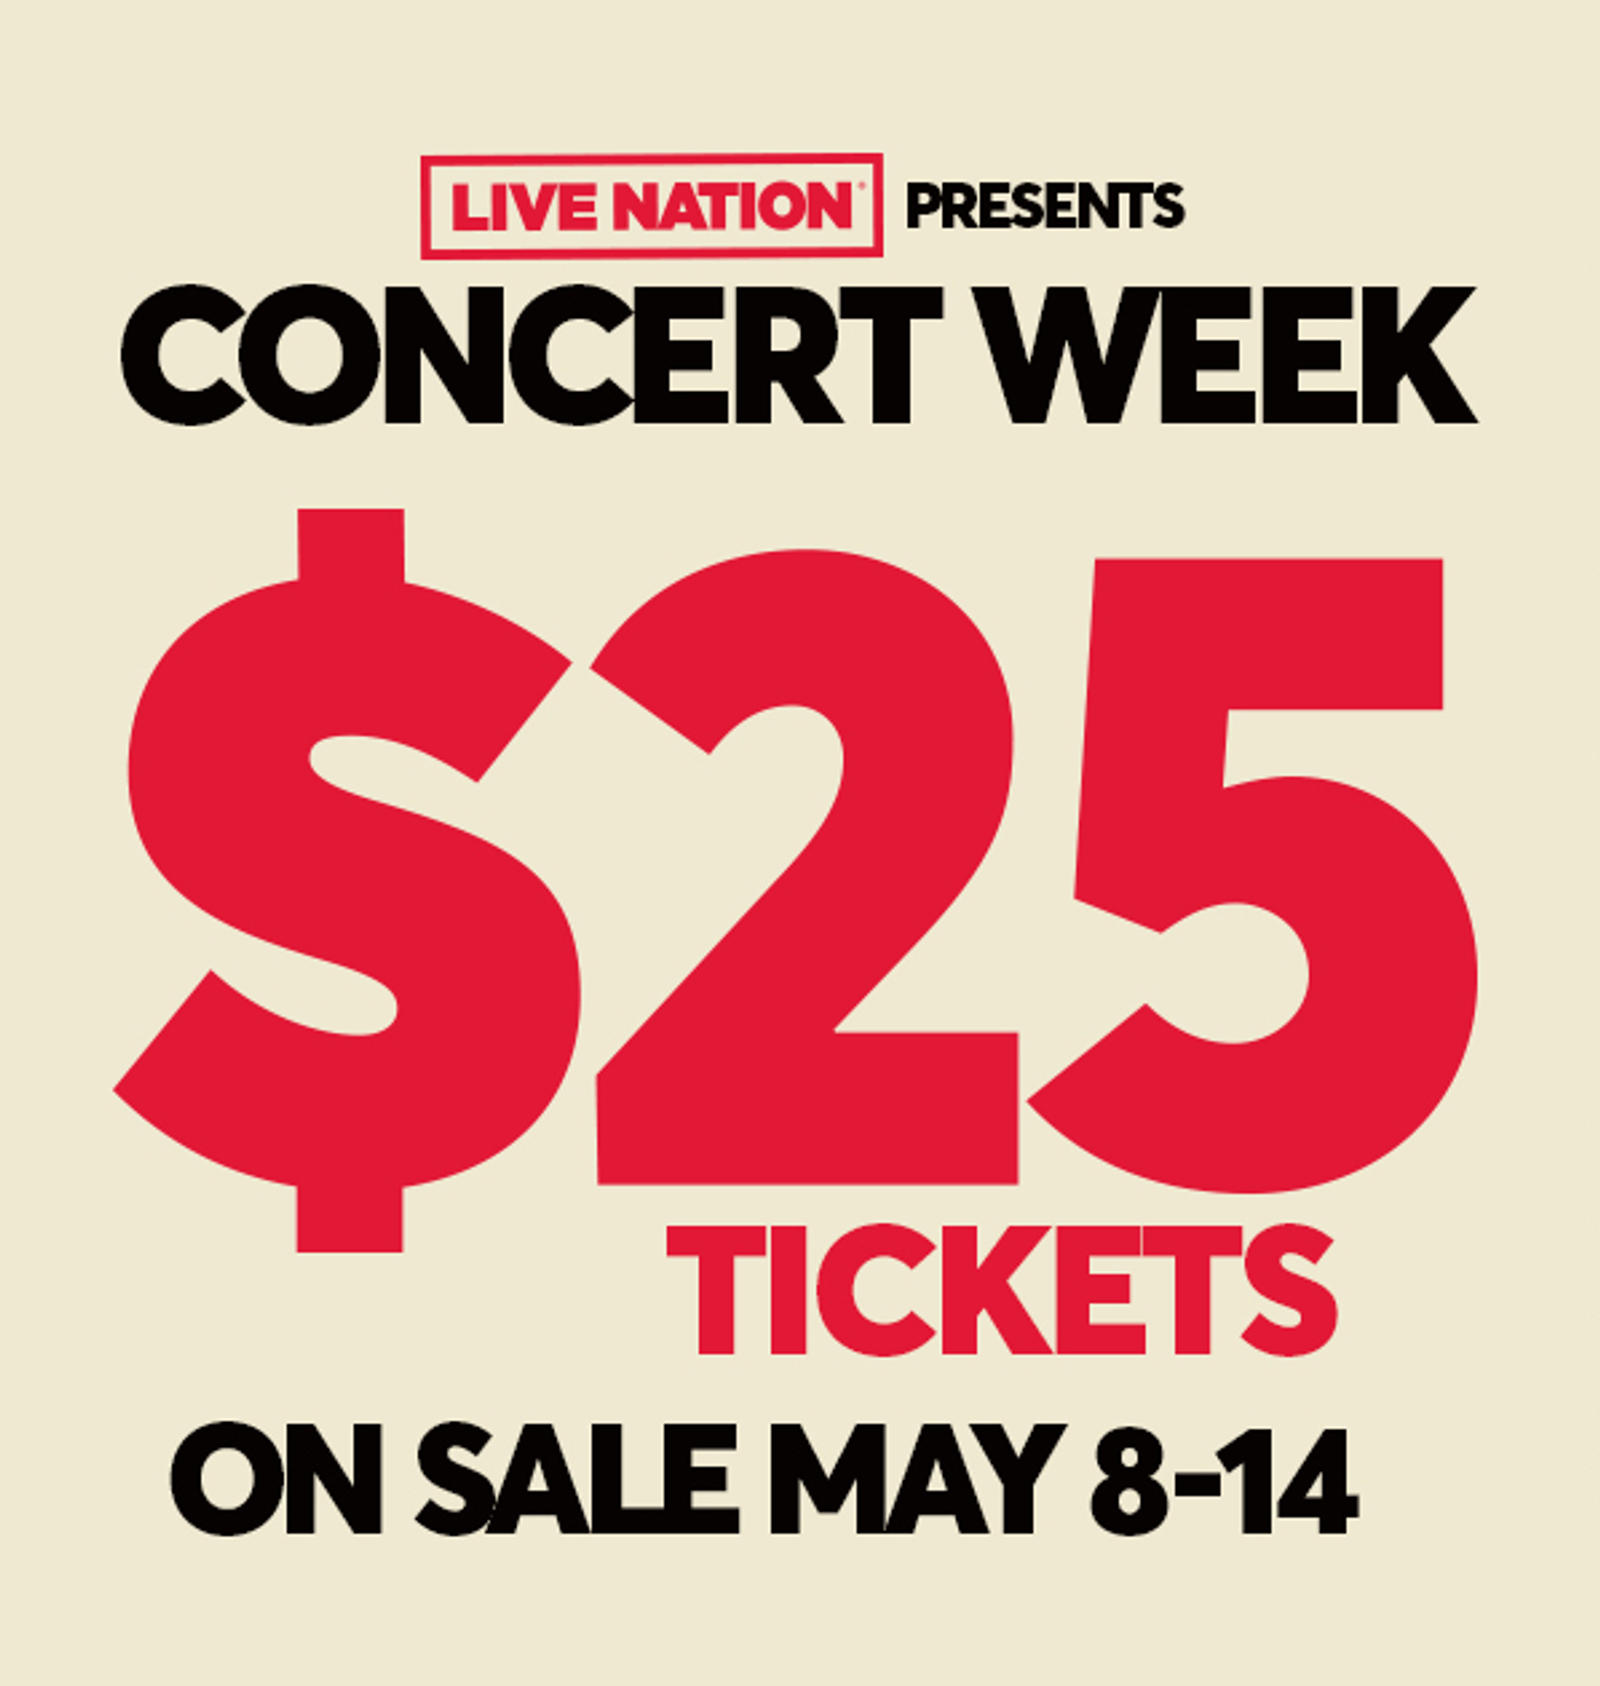 $25 Tickets - Get ready for Live Nation’s Concert Week - On Sale May 8-14! $25 concert and comedy tickets to over 5,000 shows — that’s up to 75% off!